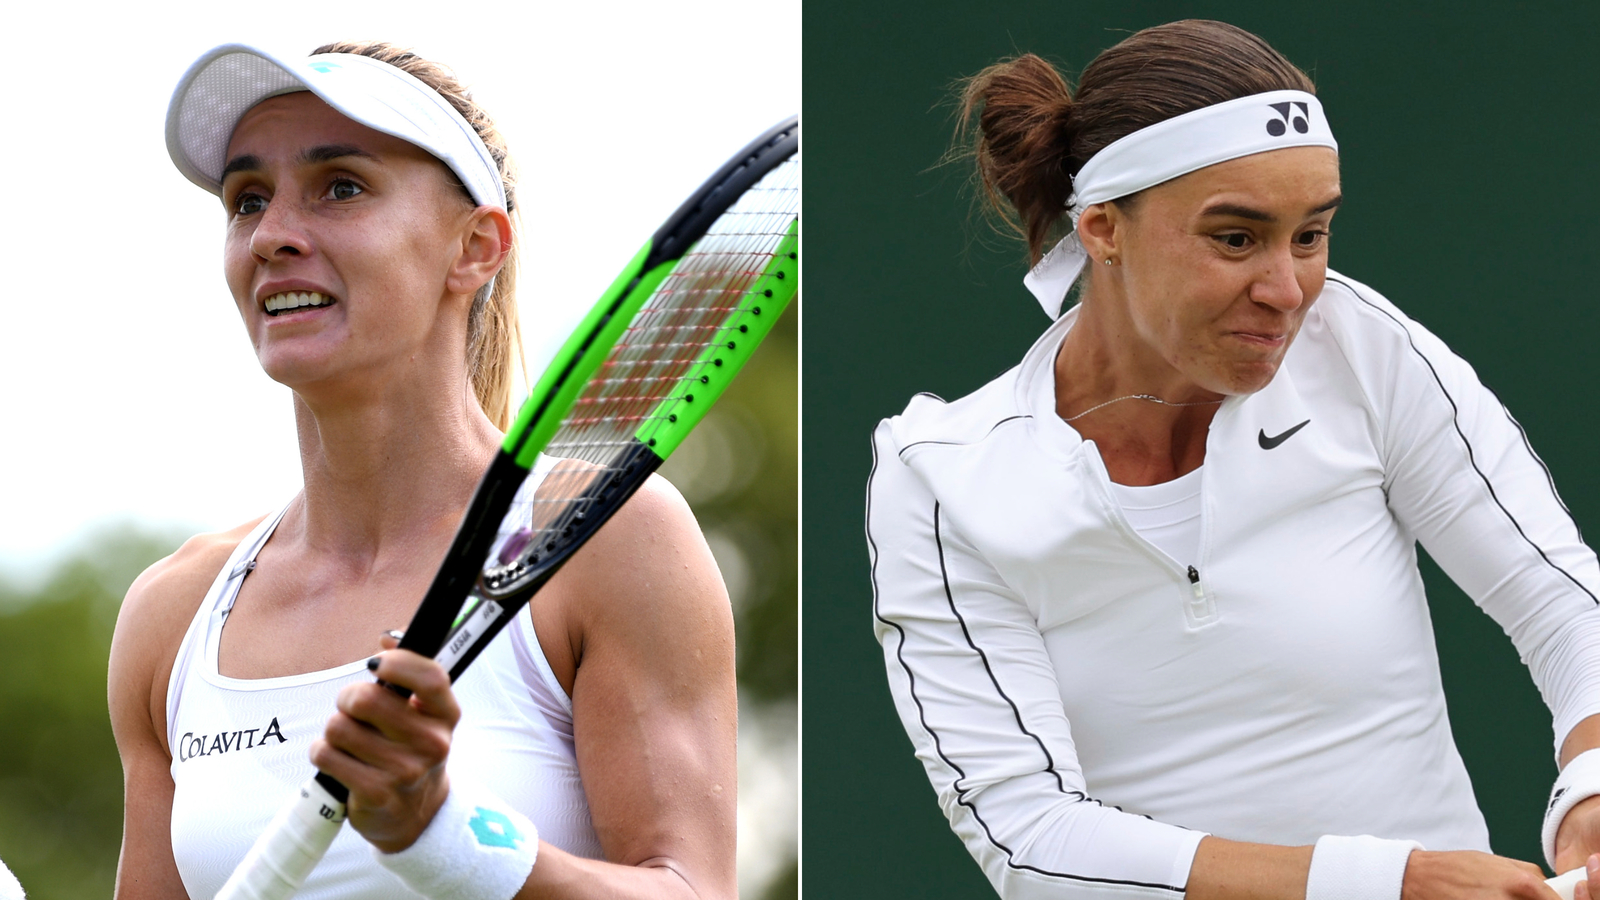 Ukrainian tennis players Anhelina Kalinina and Lesia Tsurenko have been drawn to play one another at Wimbledon on June 29.